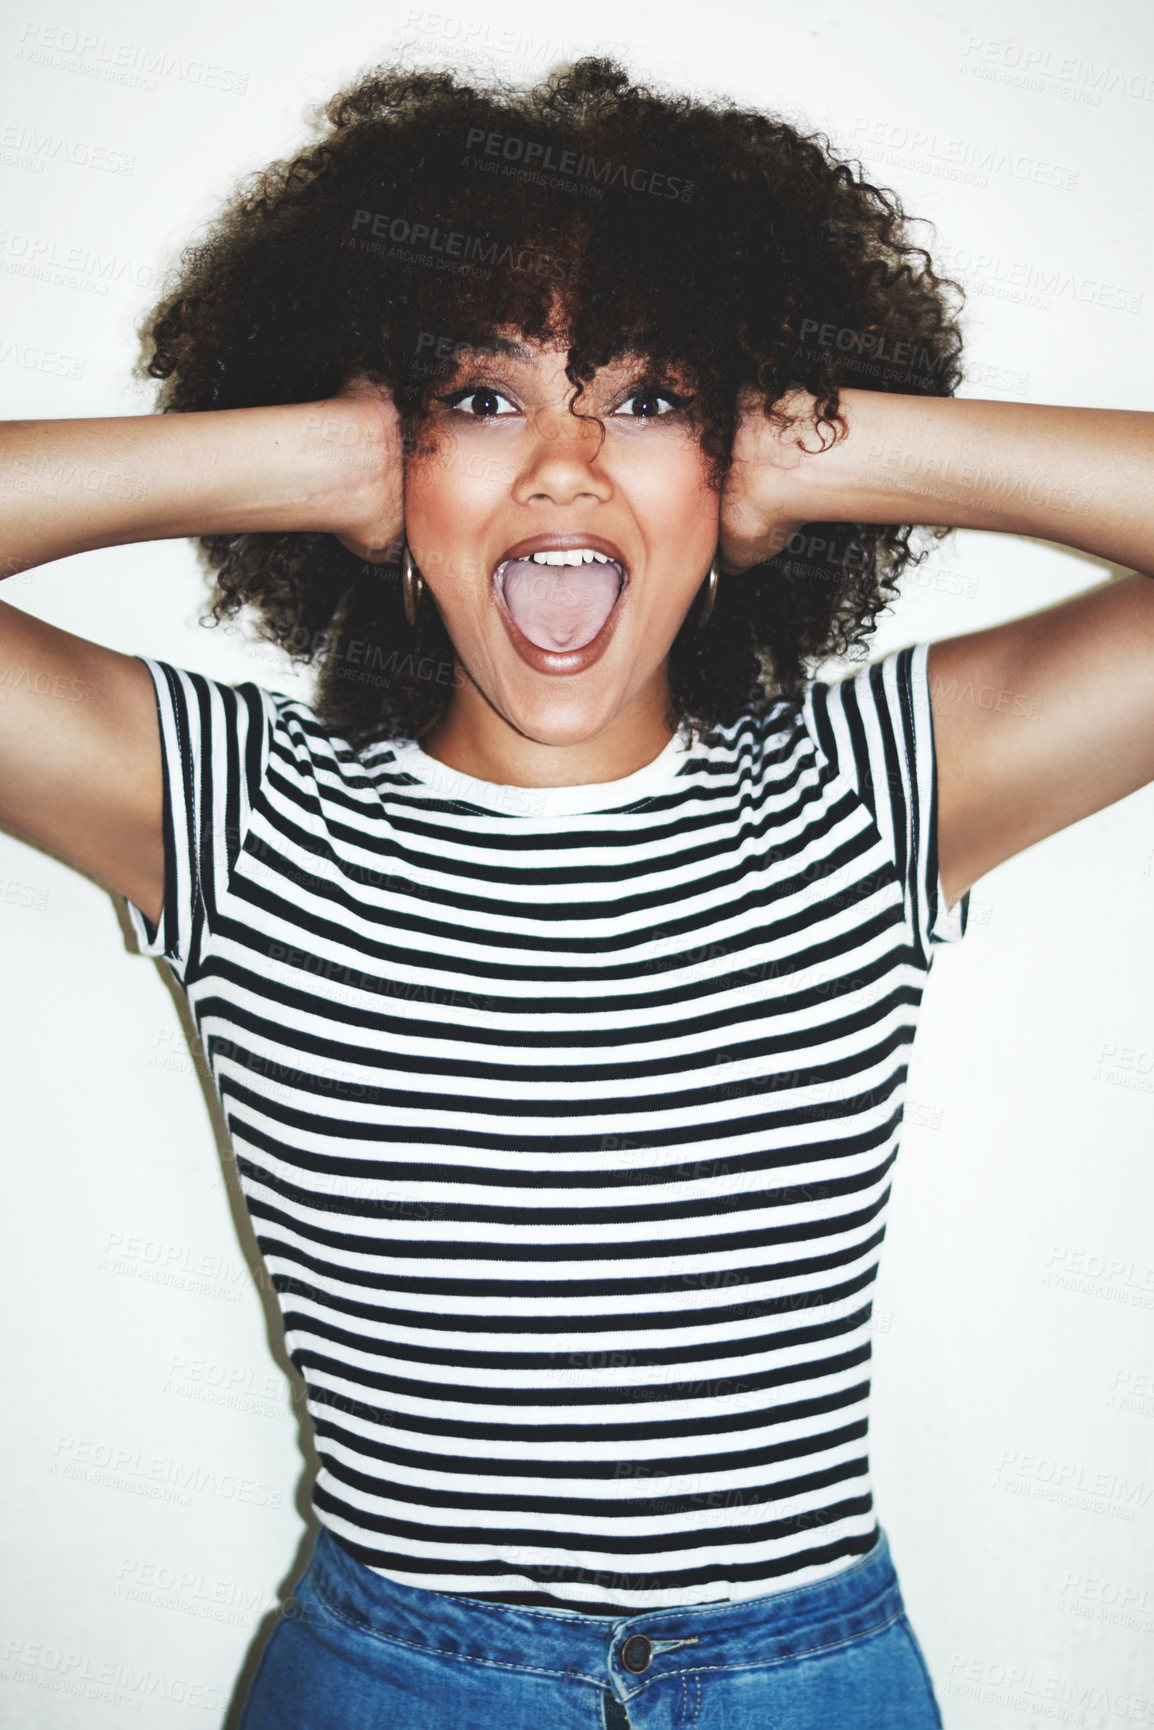 Buy stock photo Studio shot of an excited young woman posing against a gray background